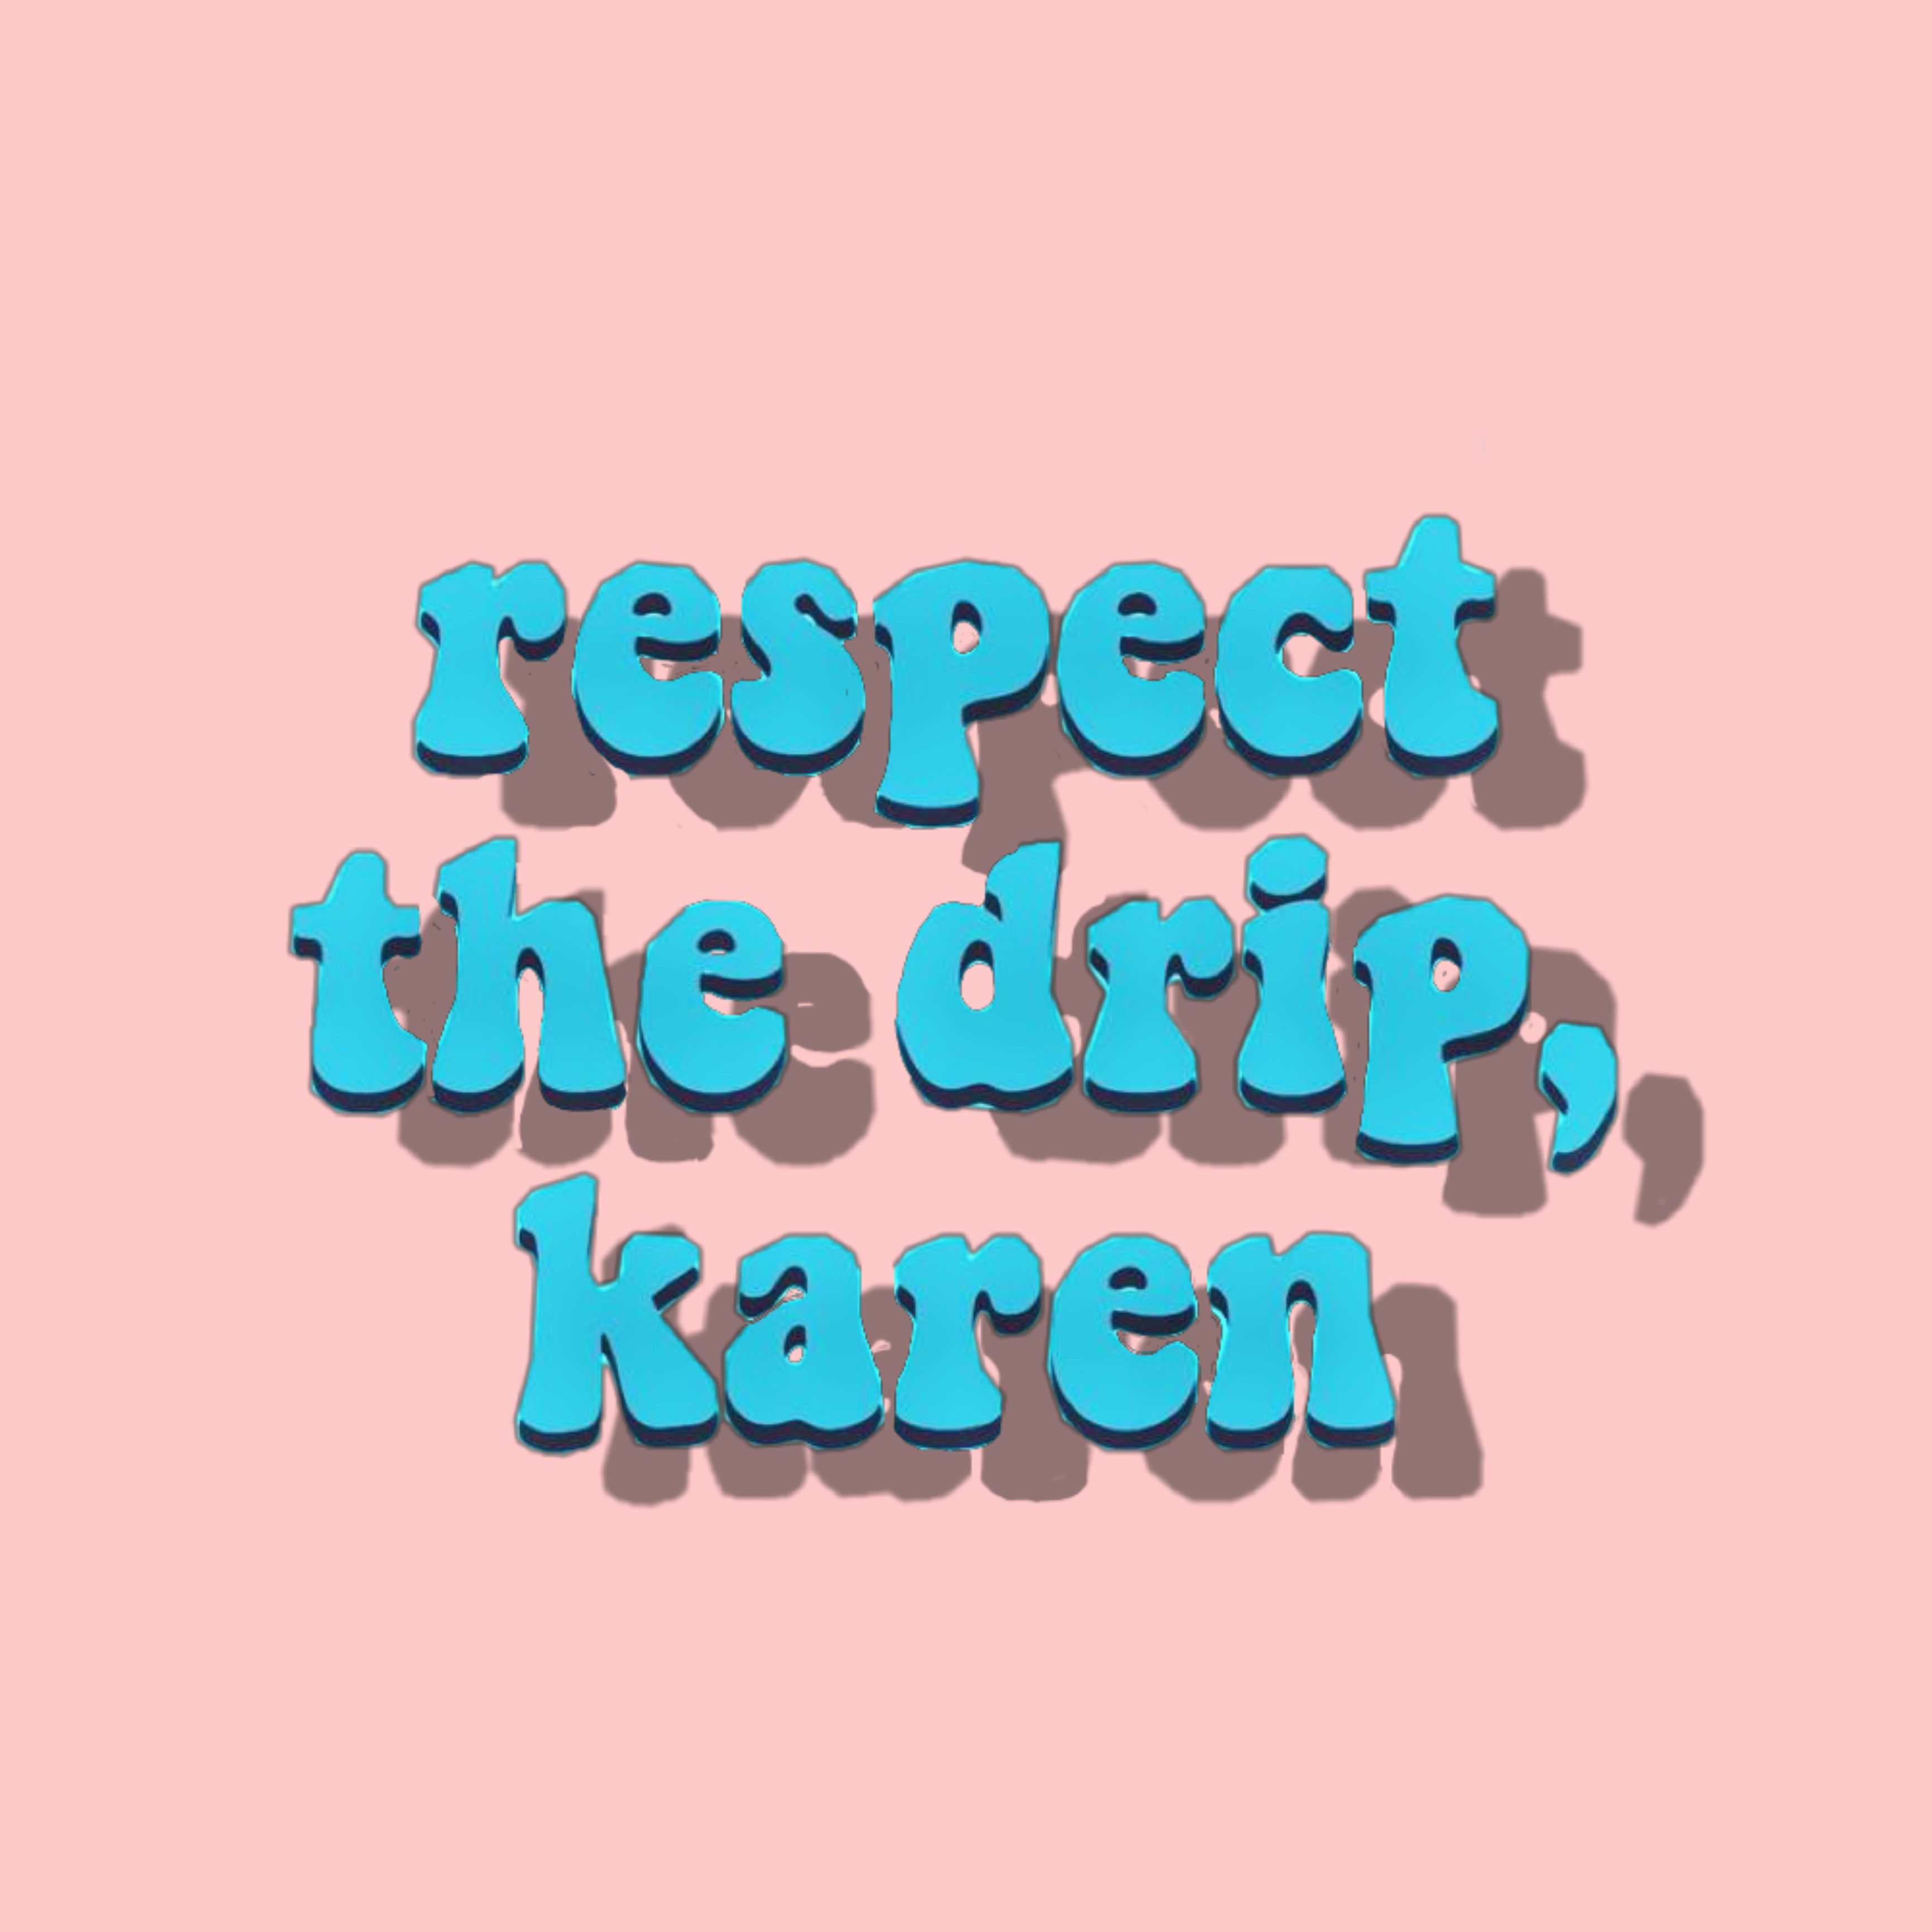 Respect Wallpapers